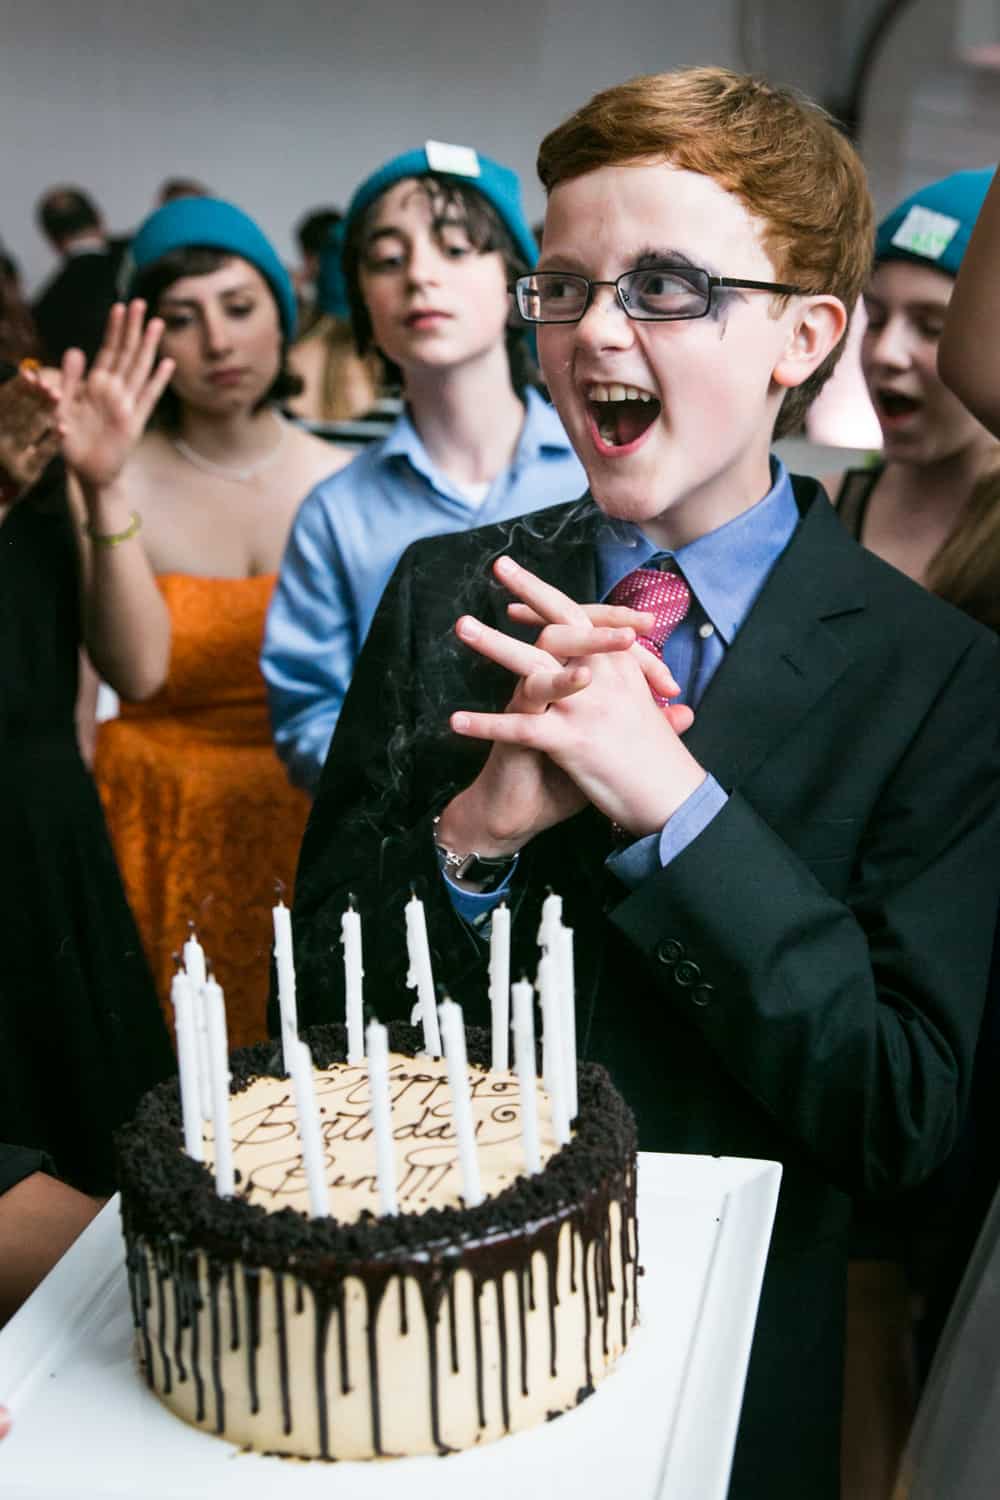 Boy celebrating after blowing out candles for an article on how to plan the perfect bar mitzvah